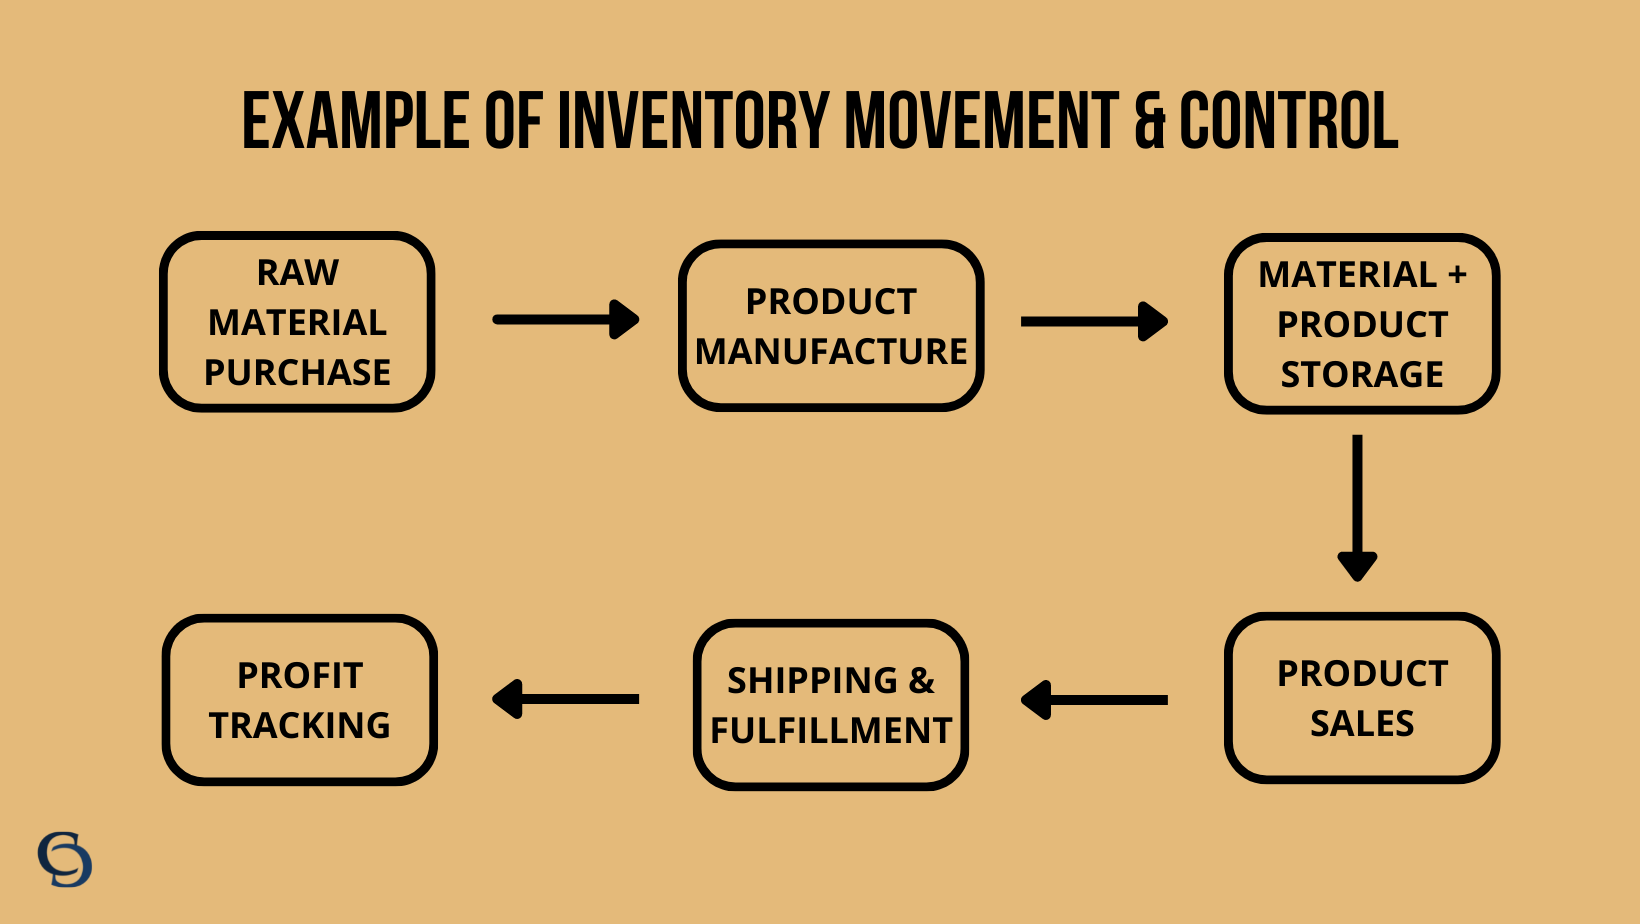 Example of inventory movement & control